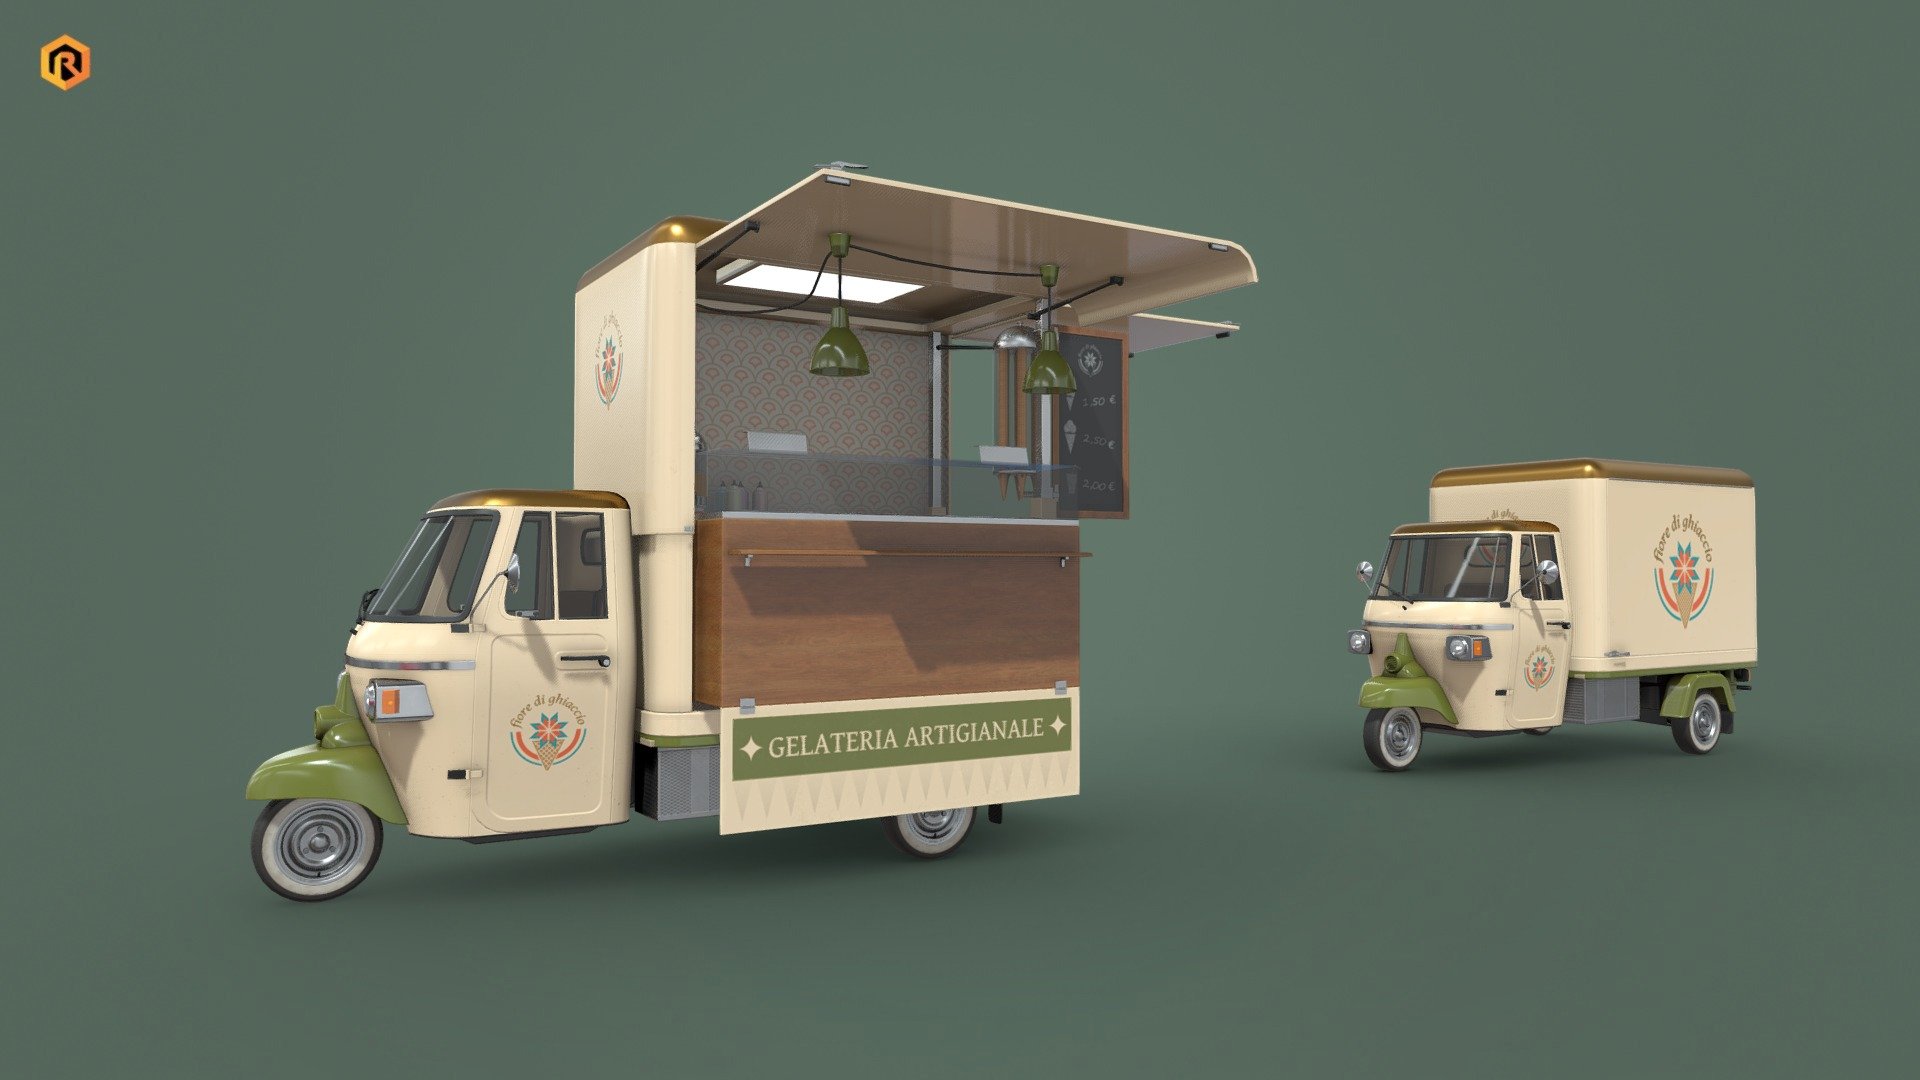 Low-poly PBR 3D model of Food Truck. 

There is open and closed trailer version of the model included.

You can also get this model in a collection: https://skfb.ly/oJyQt

You can also visit my store page to find other themes of food carts.

This model is best for use in games and other VR/AR, real-time applications such as Unity or Unreal Engine. It can also be rendered in Blender (ex Cycles) or Vray.

Technical details:




6 PBR textures sets

 (Main Body, Alpha, Emission, Trailer Main, Trailer Alpha, Trailer Emission) 

34271 Triangles.

The model is divided into few objects: main body, wheels, doors, steering wheel, two trailer types (open and close) etc. 

Lot of additional file formats included (Blender, Unity, Maya etc.)  

More file formats are available in additional zip file on product page (See all files)

Please feel free to contact me if you have any questions or need any support for this asset.

Support e-mail: support@rescue3d.com - Food Truck | Low-poly PBR 3D Model - Buy Royalty Free 3D model by Rescue3D Assets (@rescue3d) 3d model